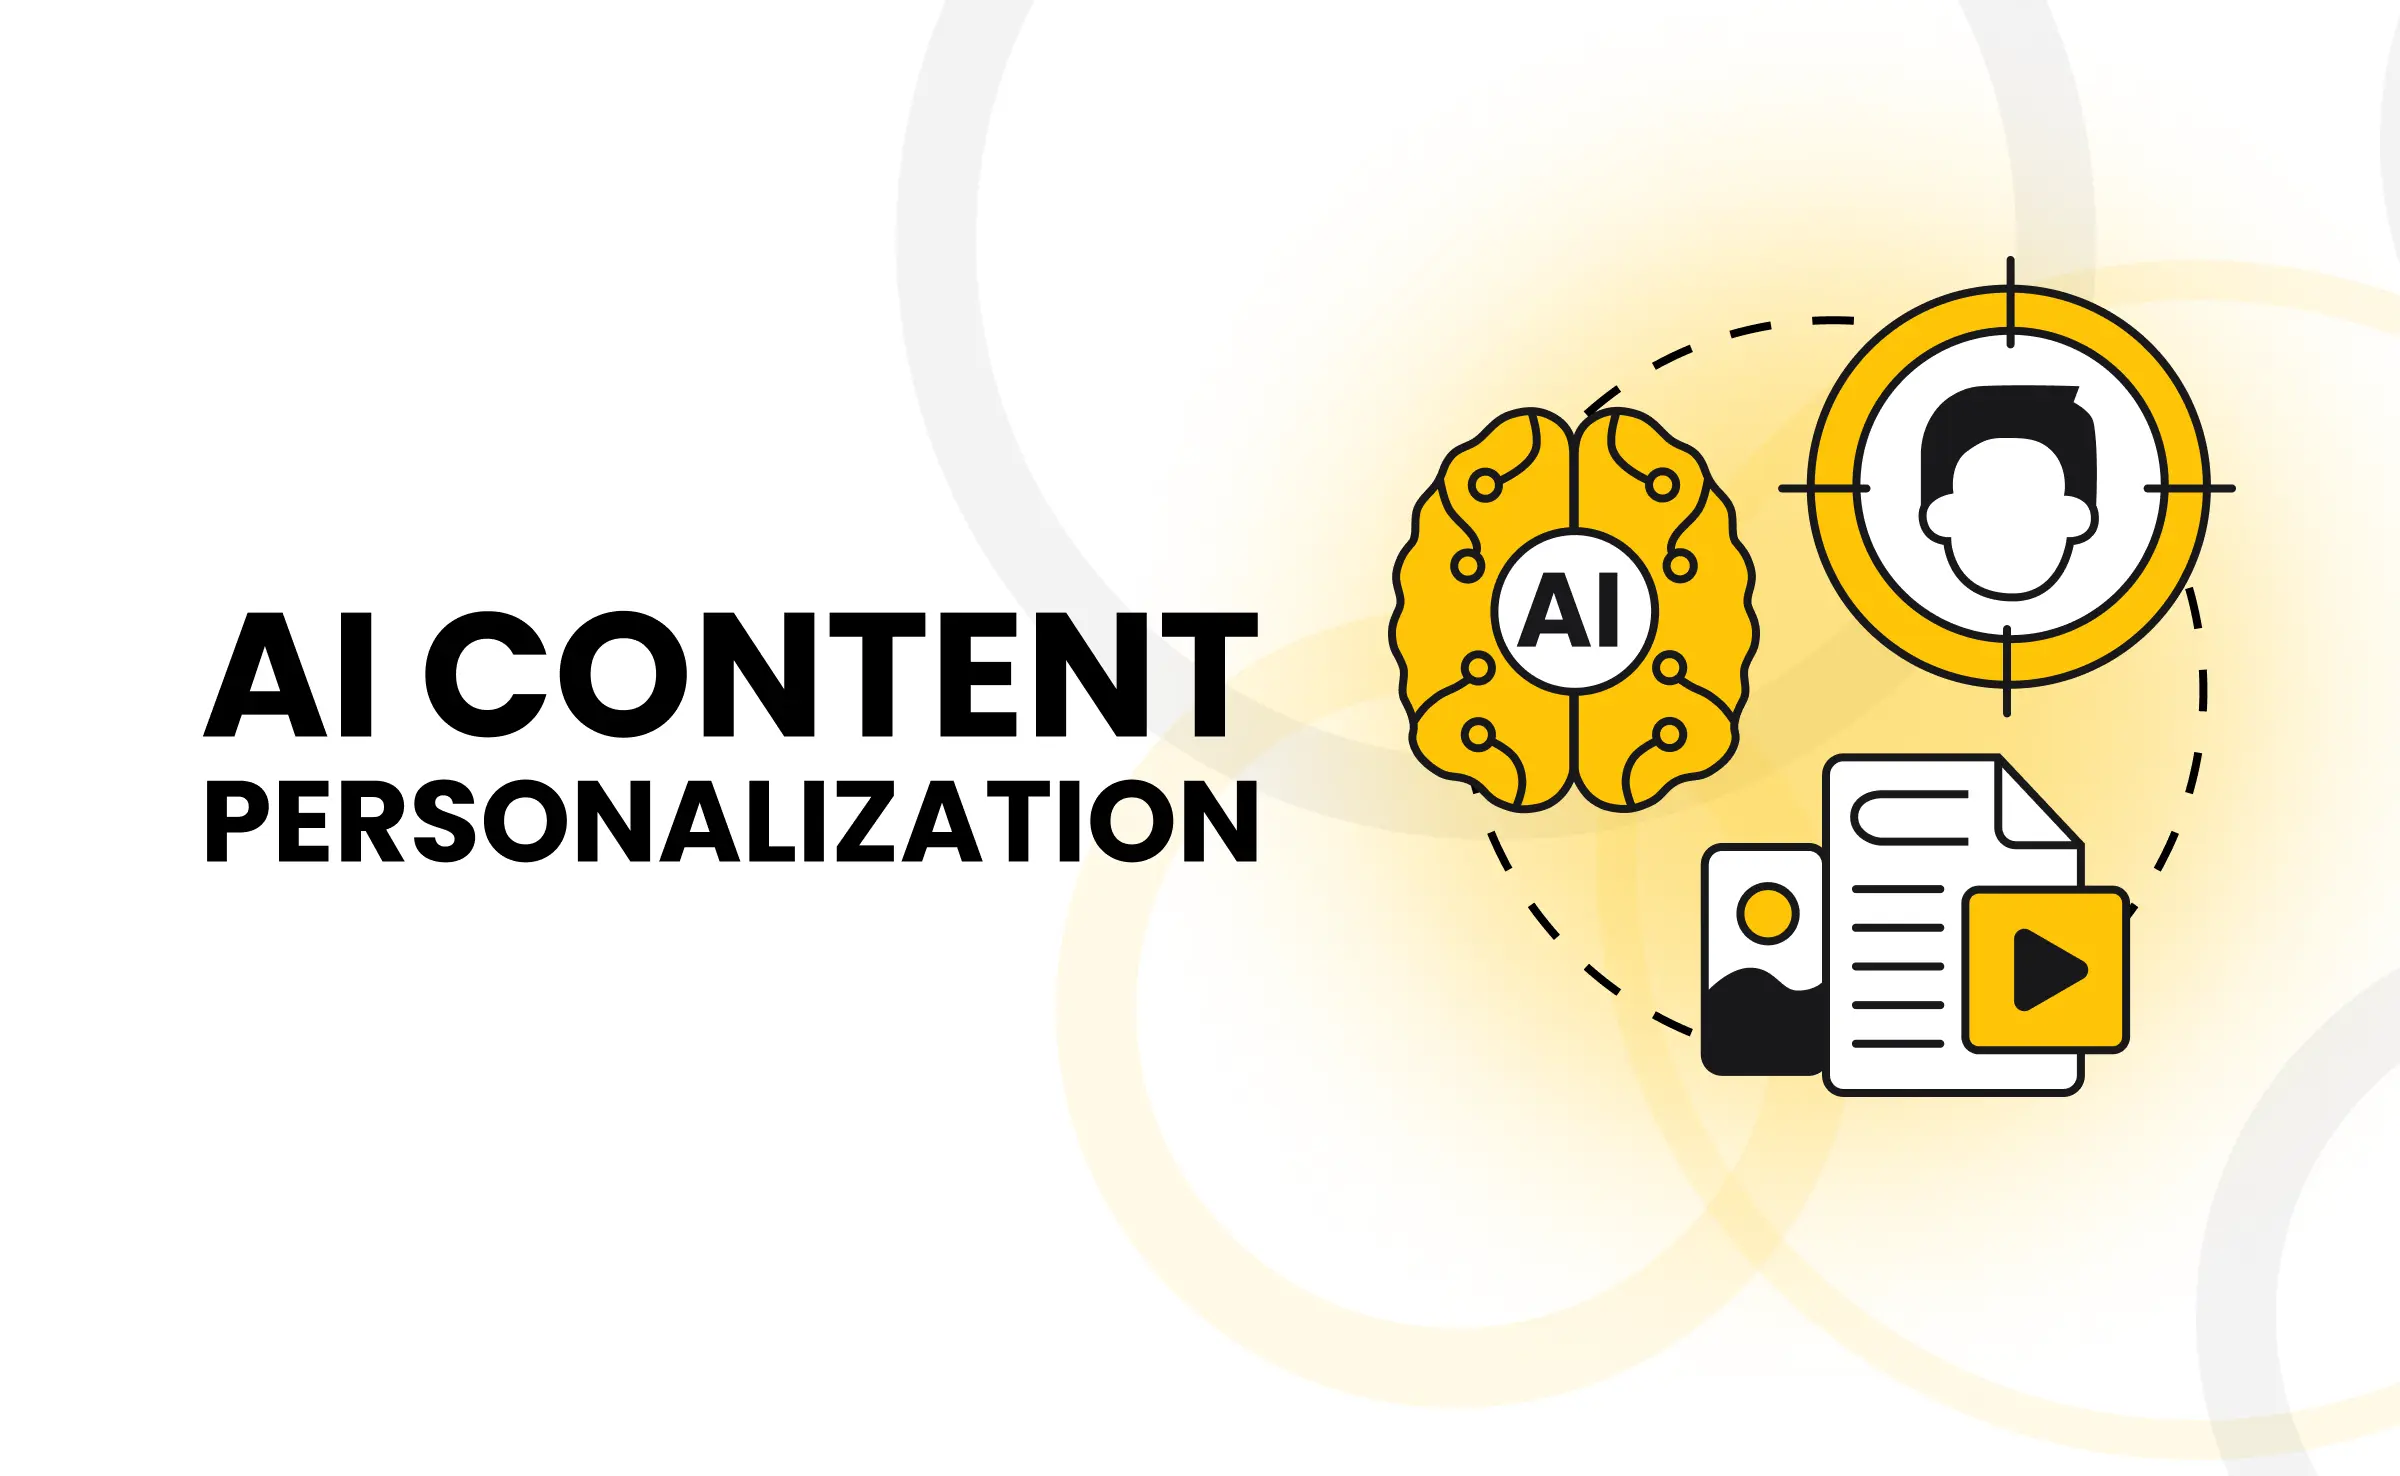 content personalization with AI